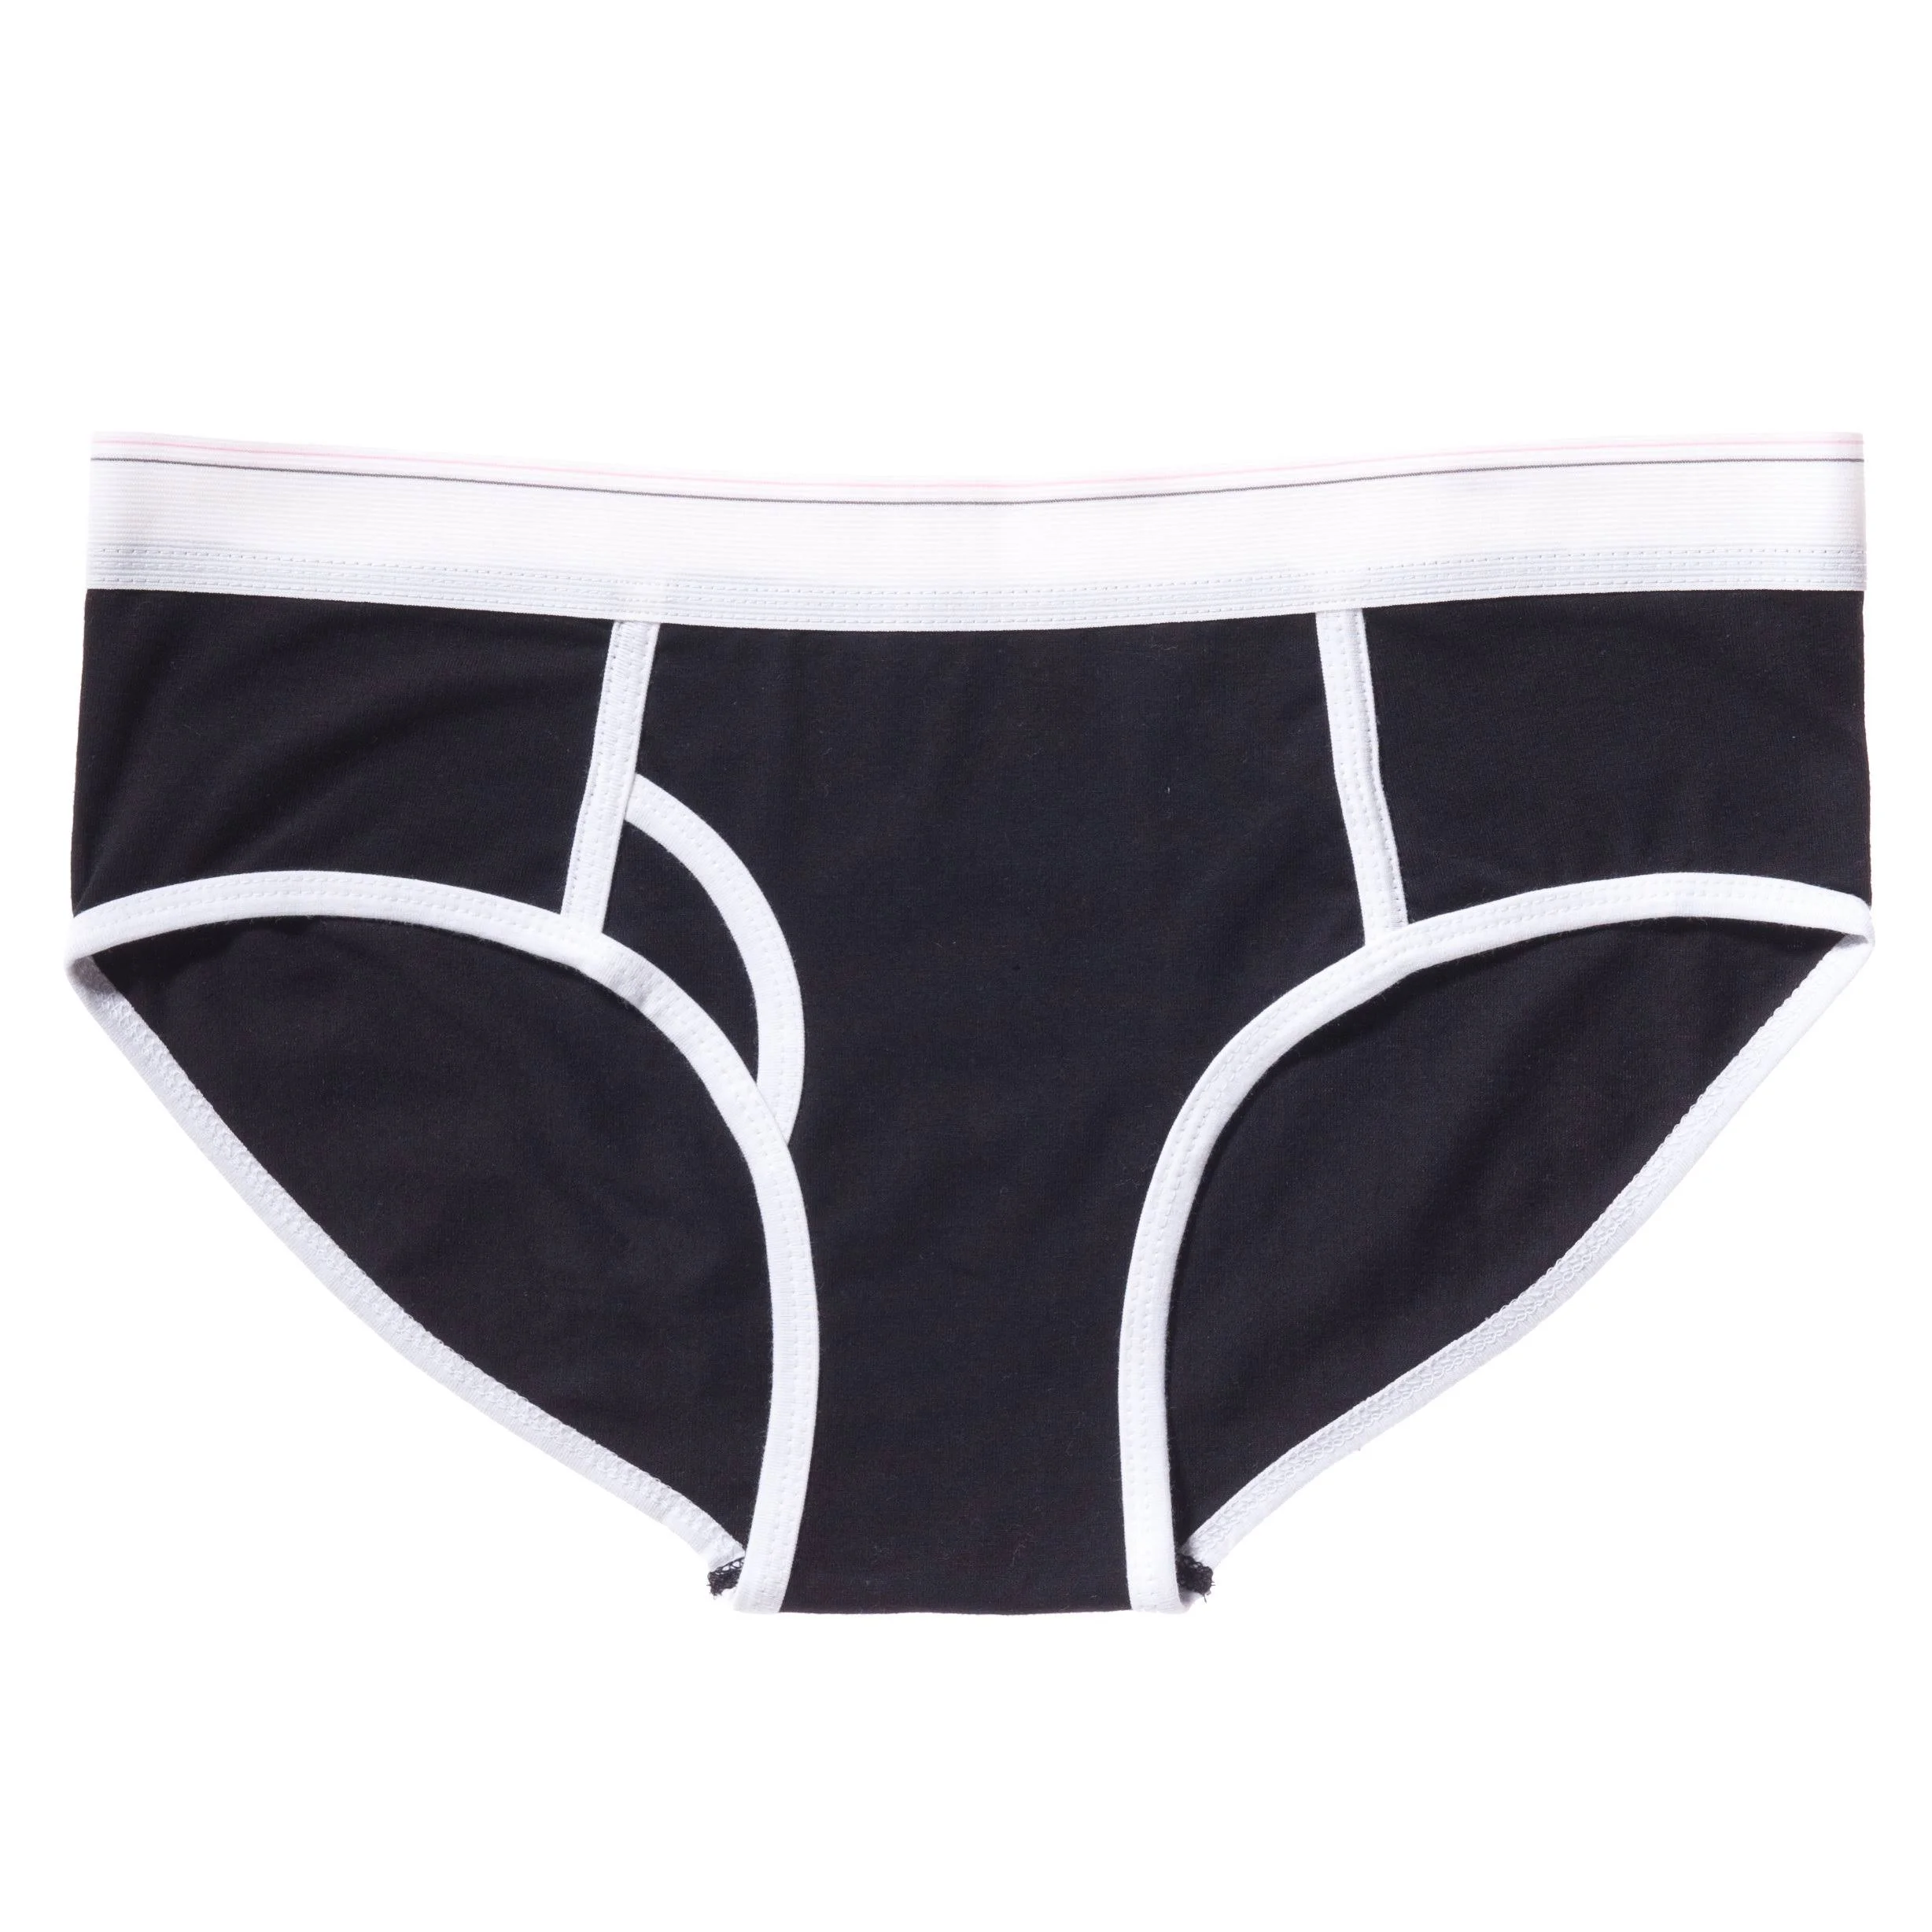 Cotton Boxers - Bangladesh Factory, Suppliers, Manufacturers